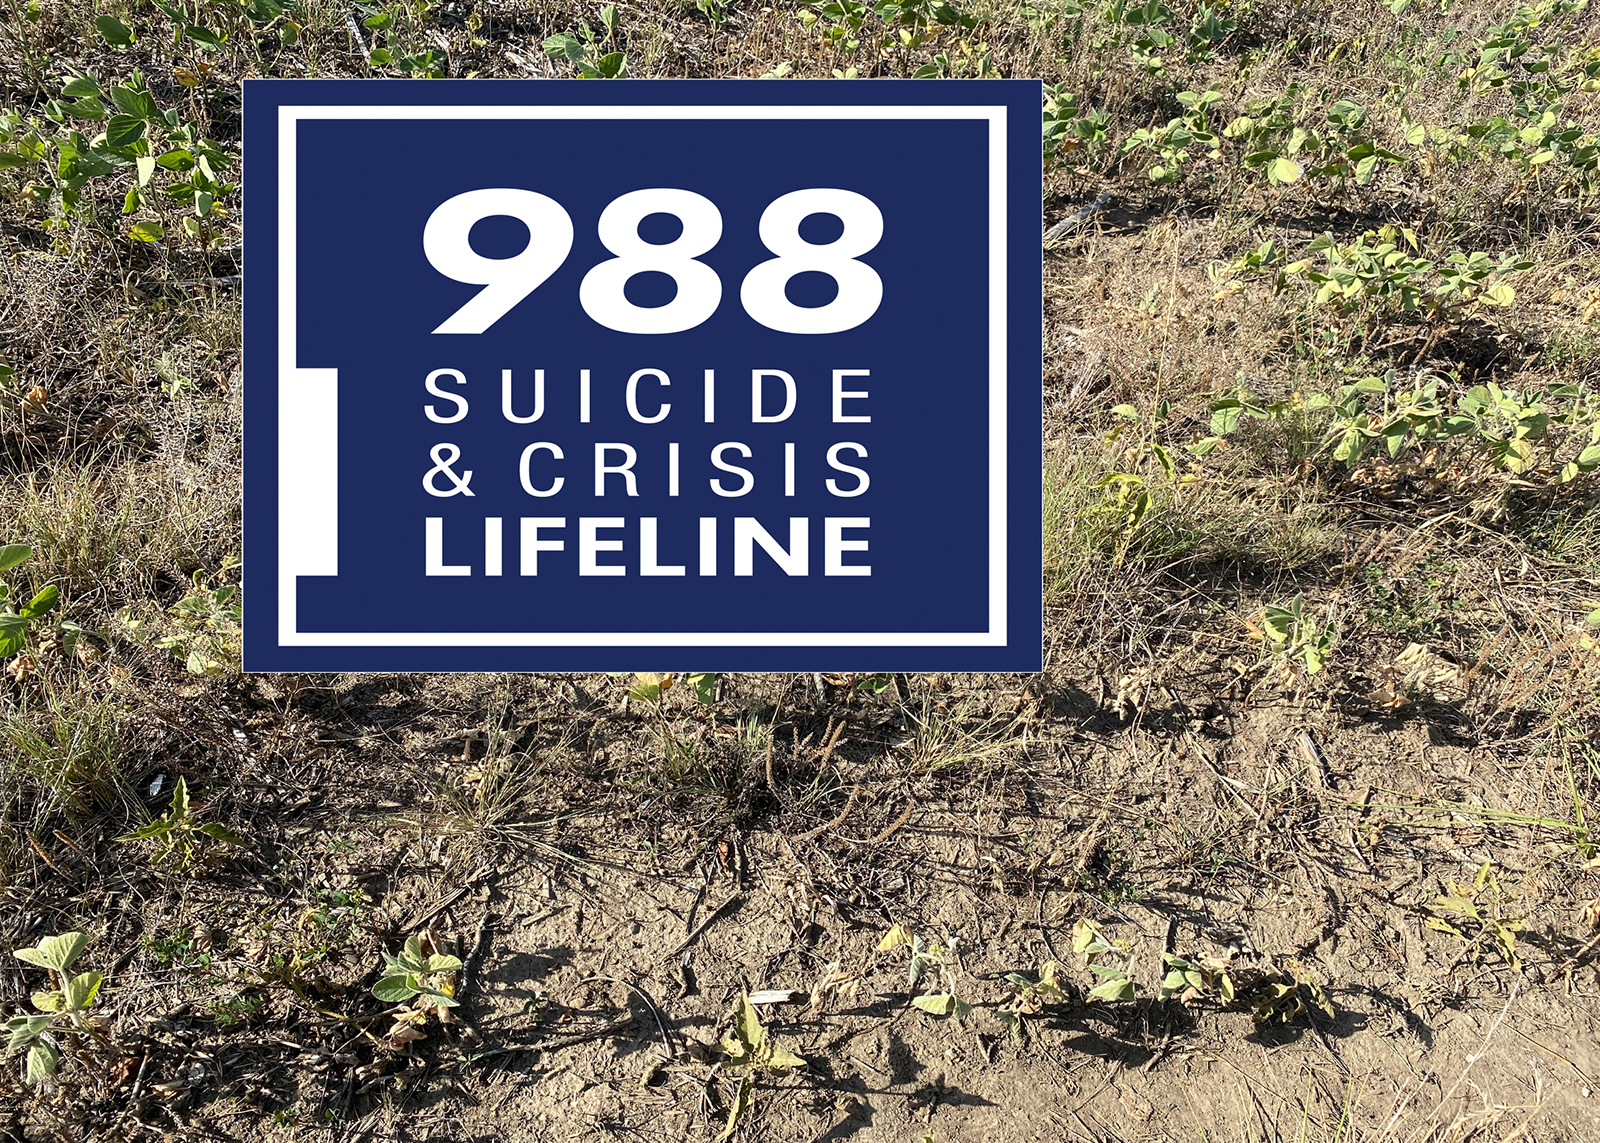 Open Drought affects more than plants and livestock. September – National Suicide Prevention Month – is a painful reminder that life is tough in rural America, especially after major events such as drought and flood. Soybean photo by Valerie Tate, University o